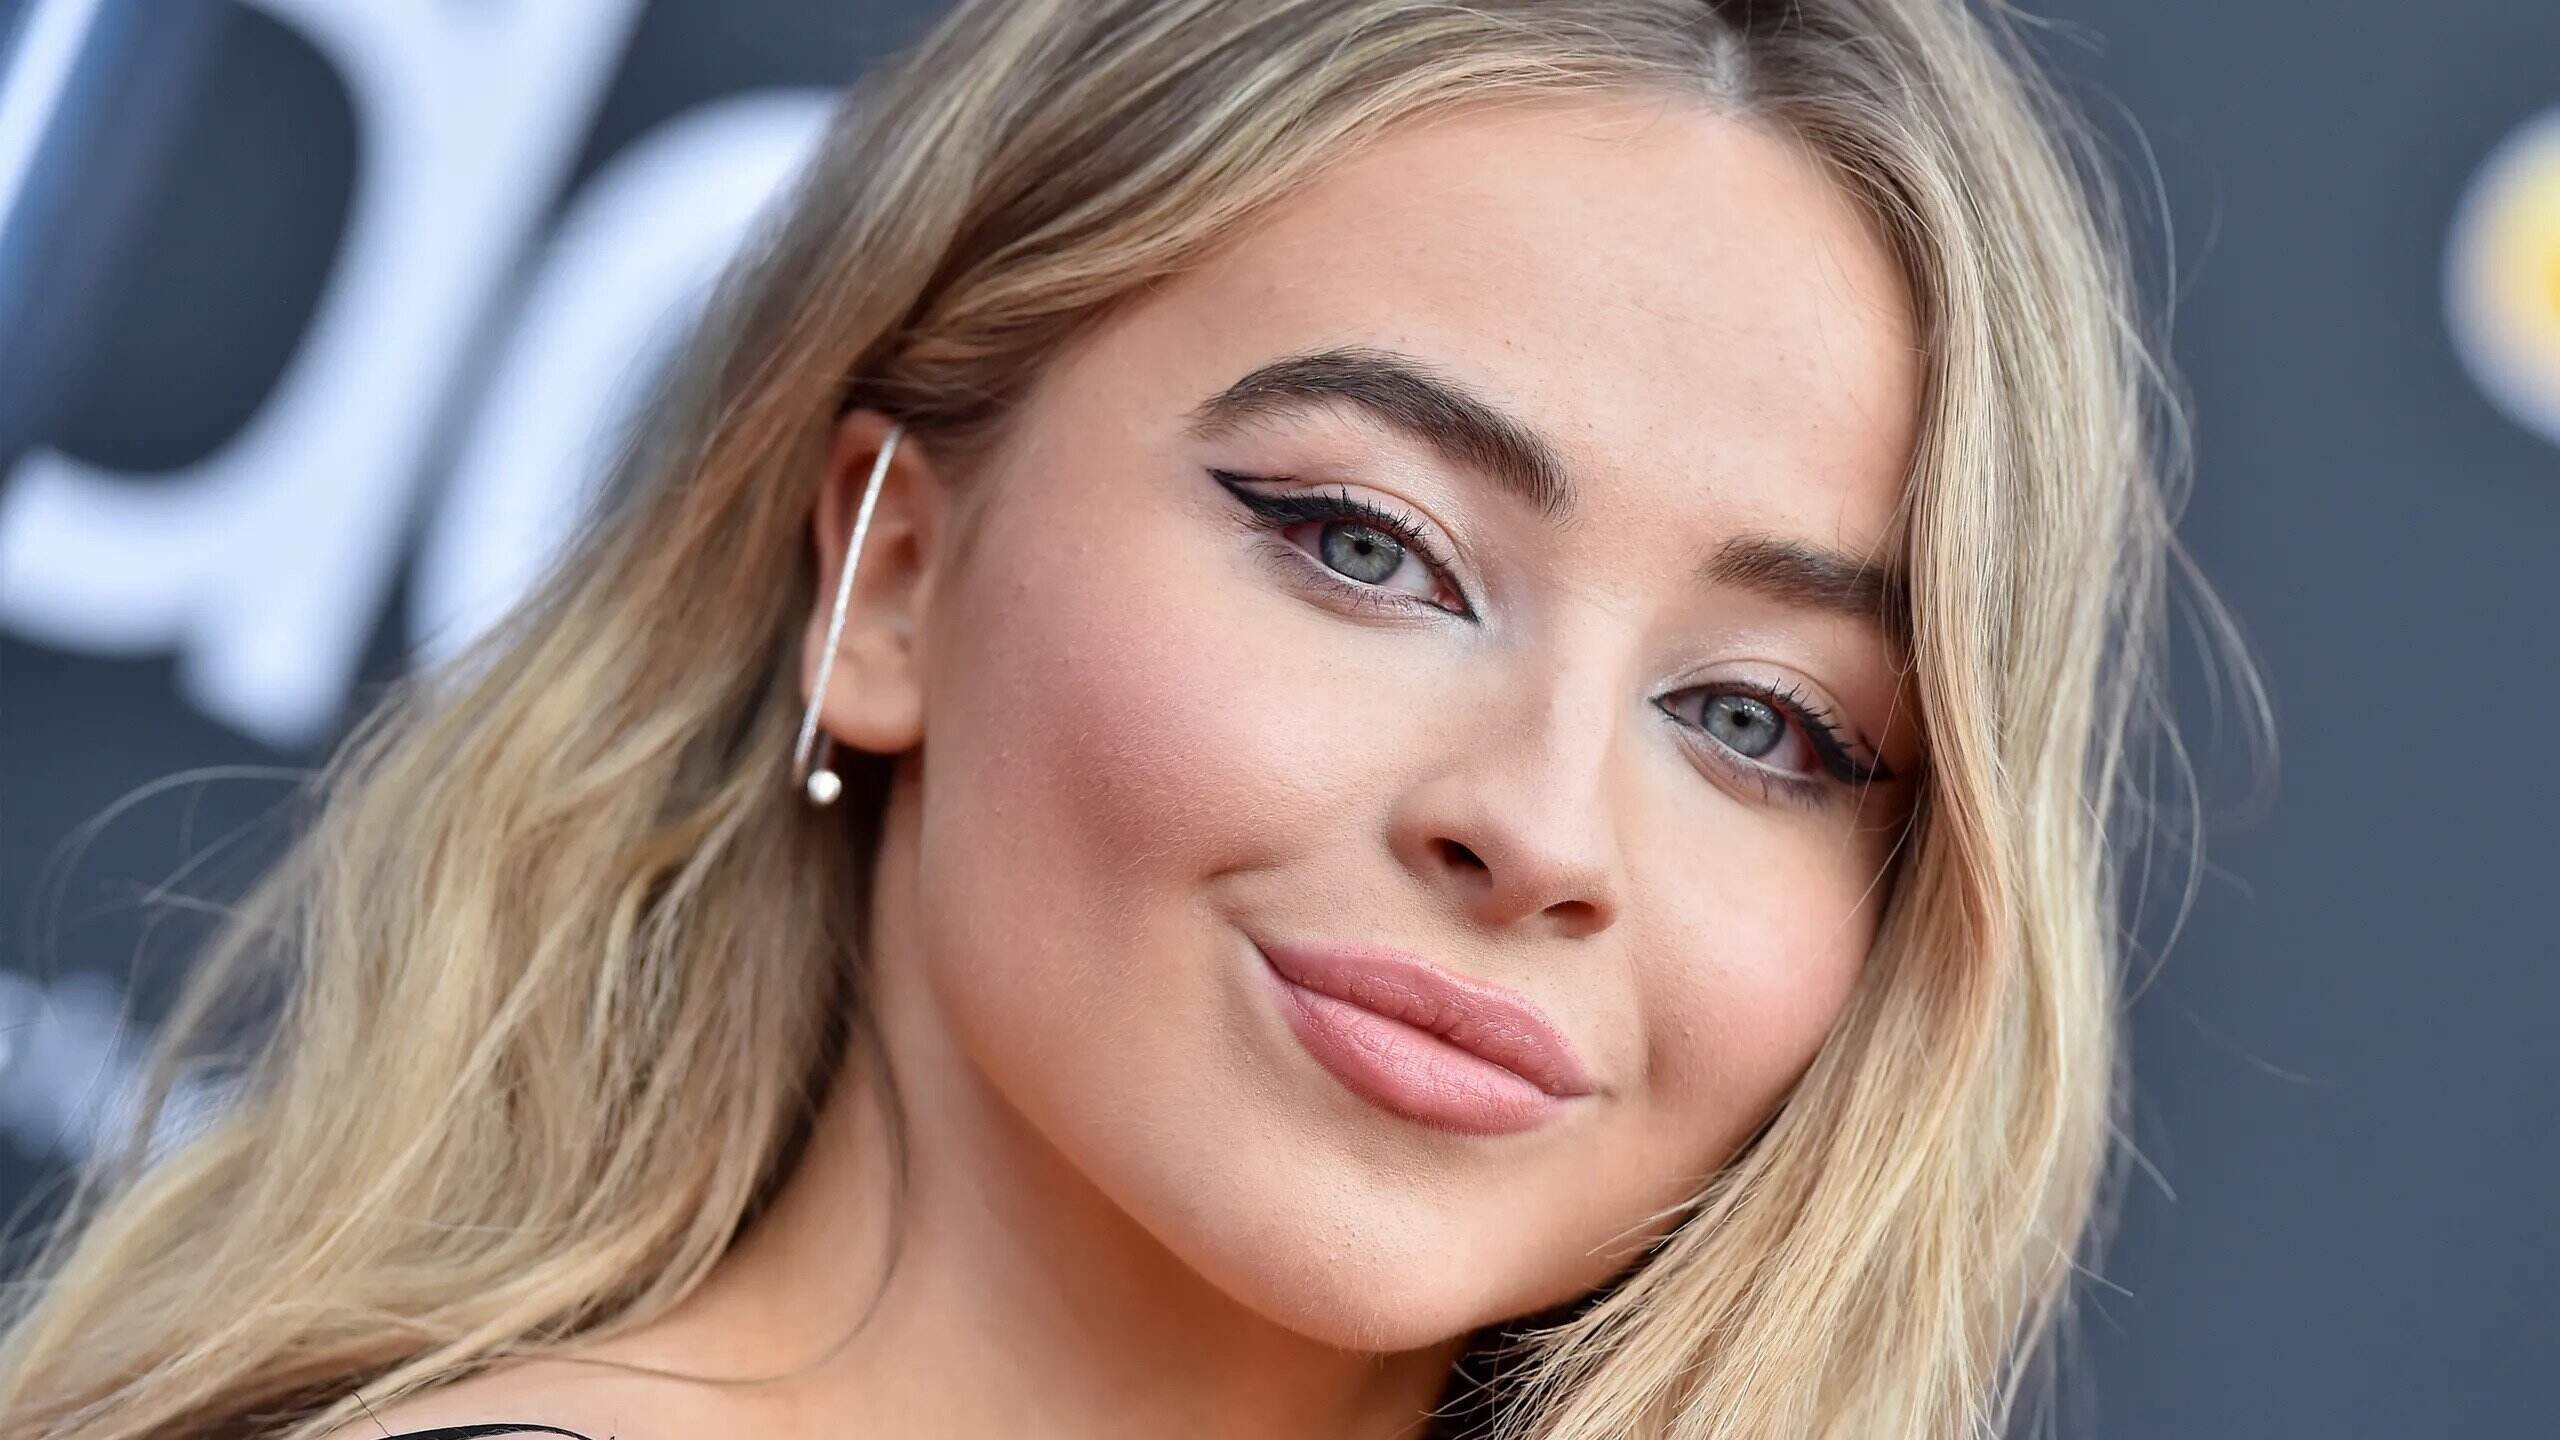 Sabrina Carpenter on What Fans Can Expect From Her 'Very Personal' Album  (Exclusive)